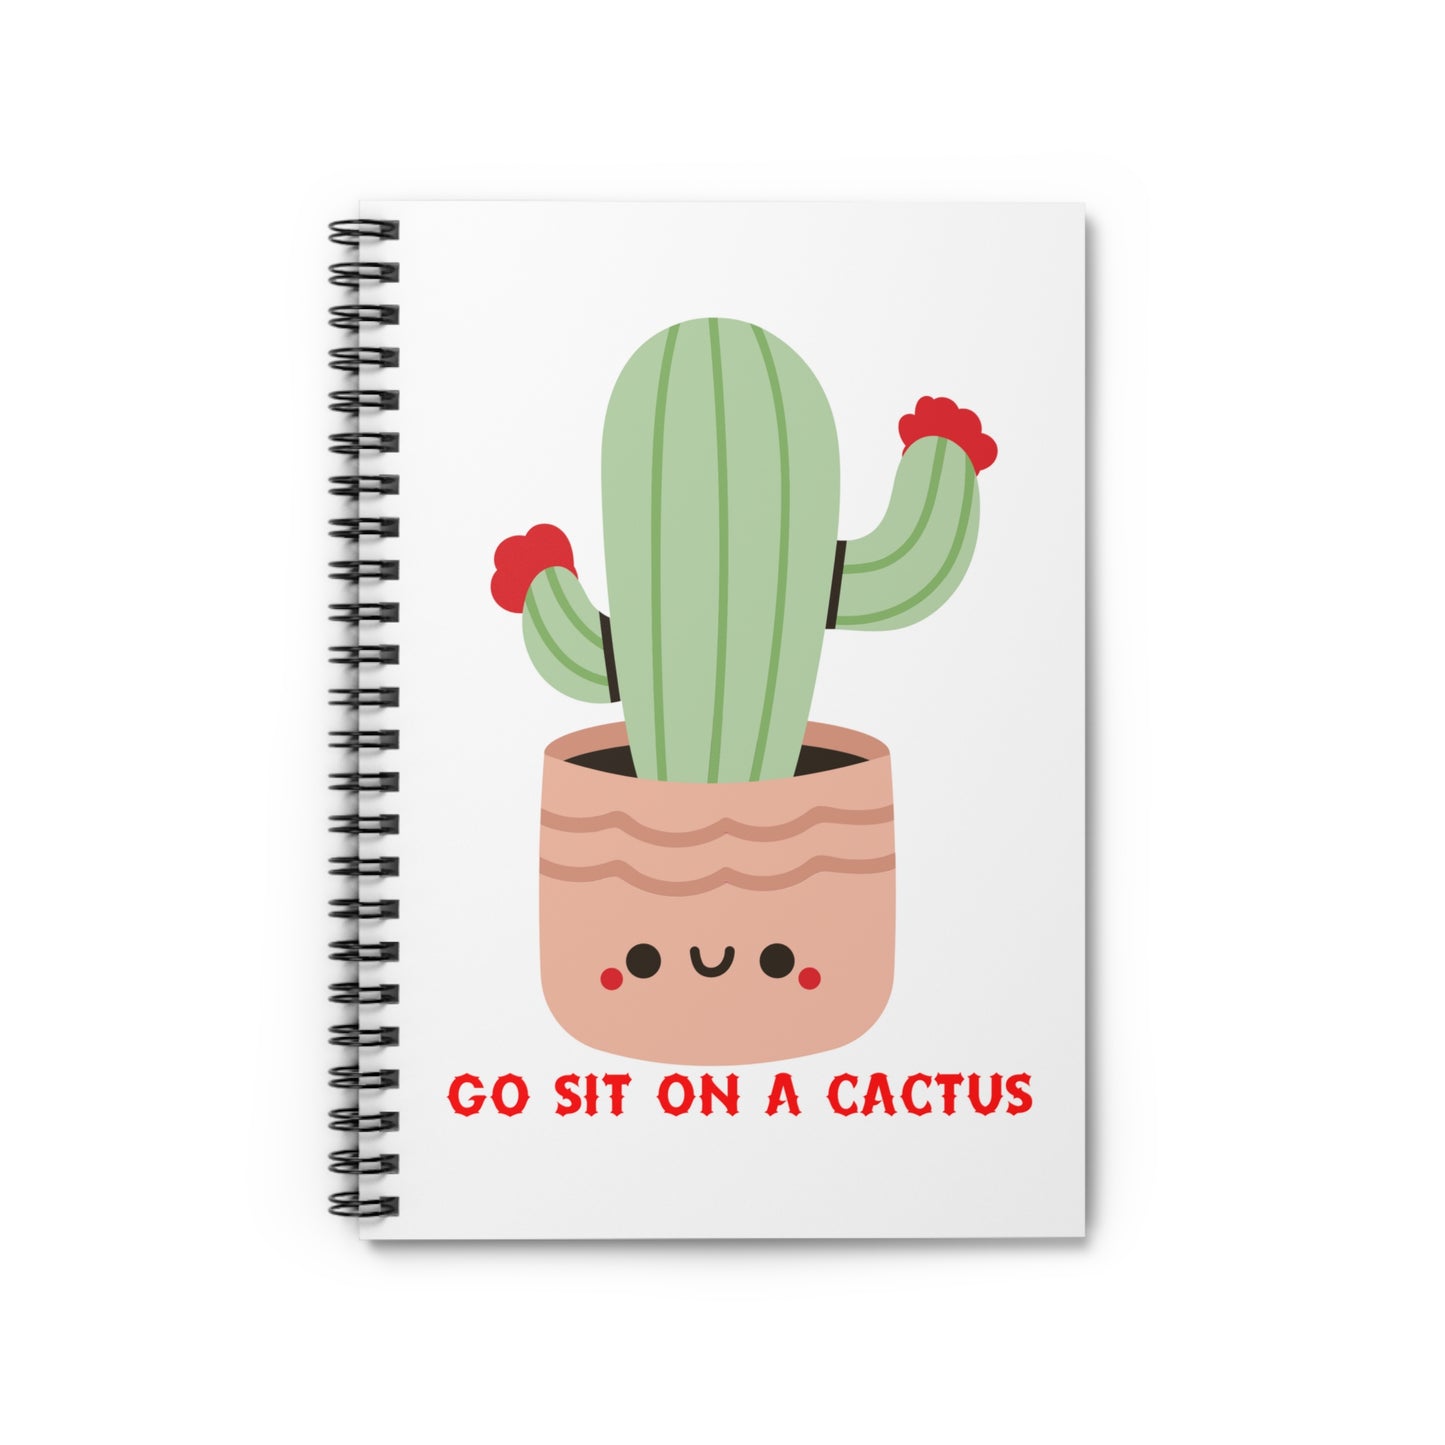 Funny Go Sit on a Cactus Spiral Notebook - Ruled Line